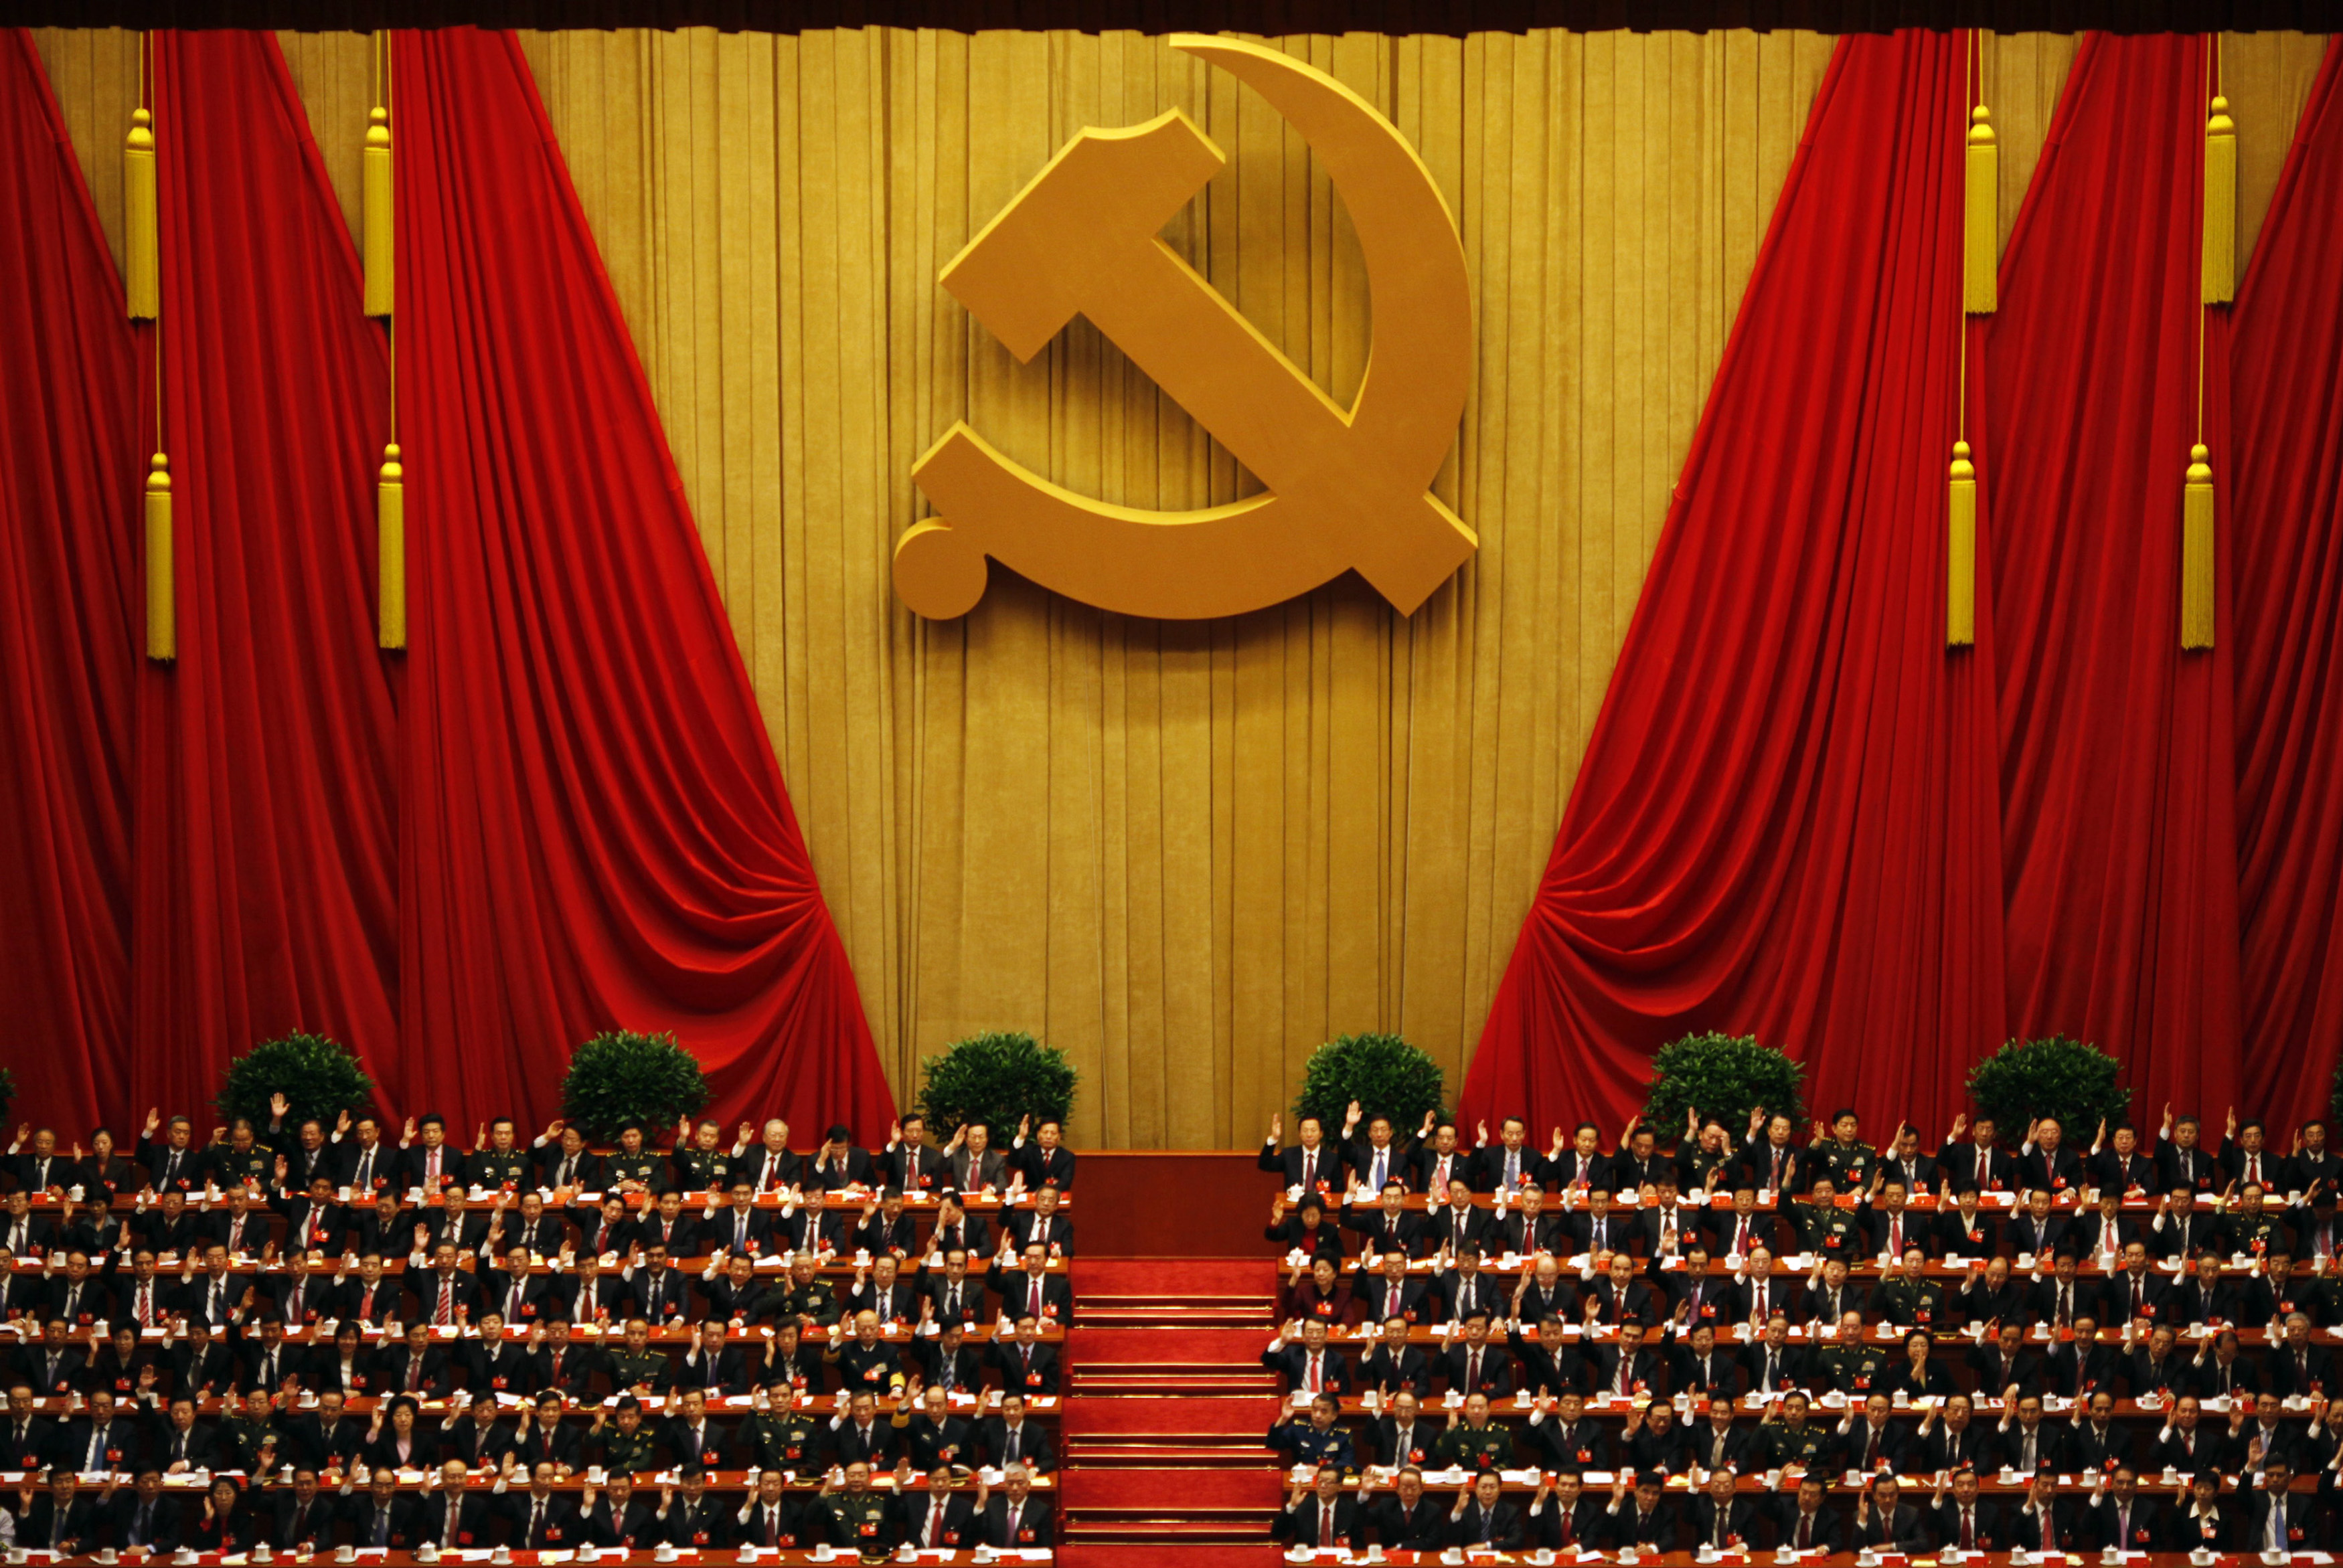 A general view shows delegates raising their hands as they take a vote at the closing session of the 18th National Congress of the Communist Party of China at the Great Hall of the People in Beijing on Nov. 14, 2012 (Carlos Barria —Reuters)